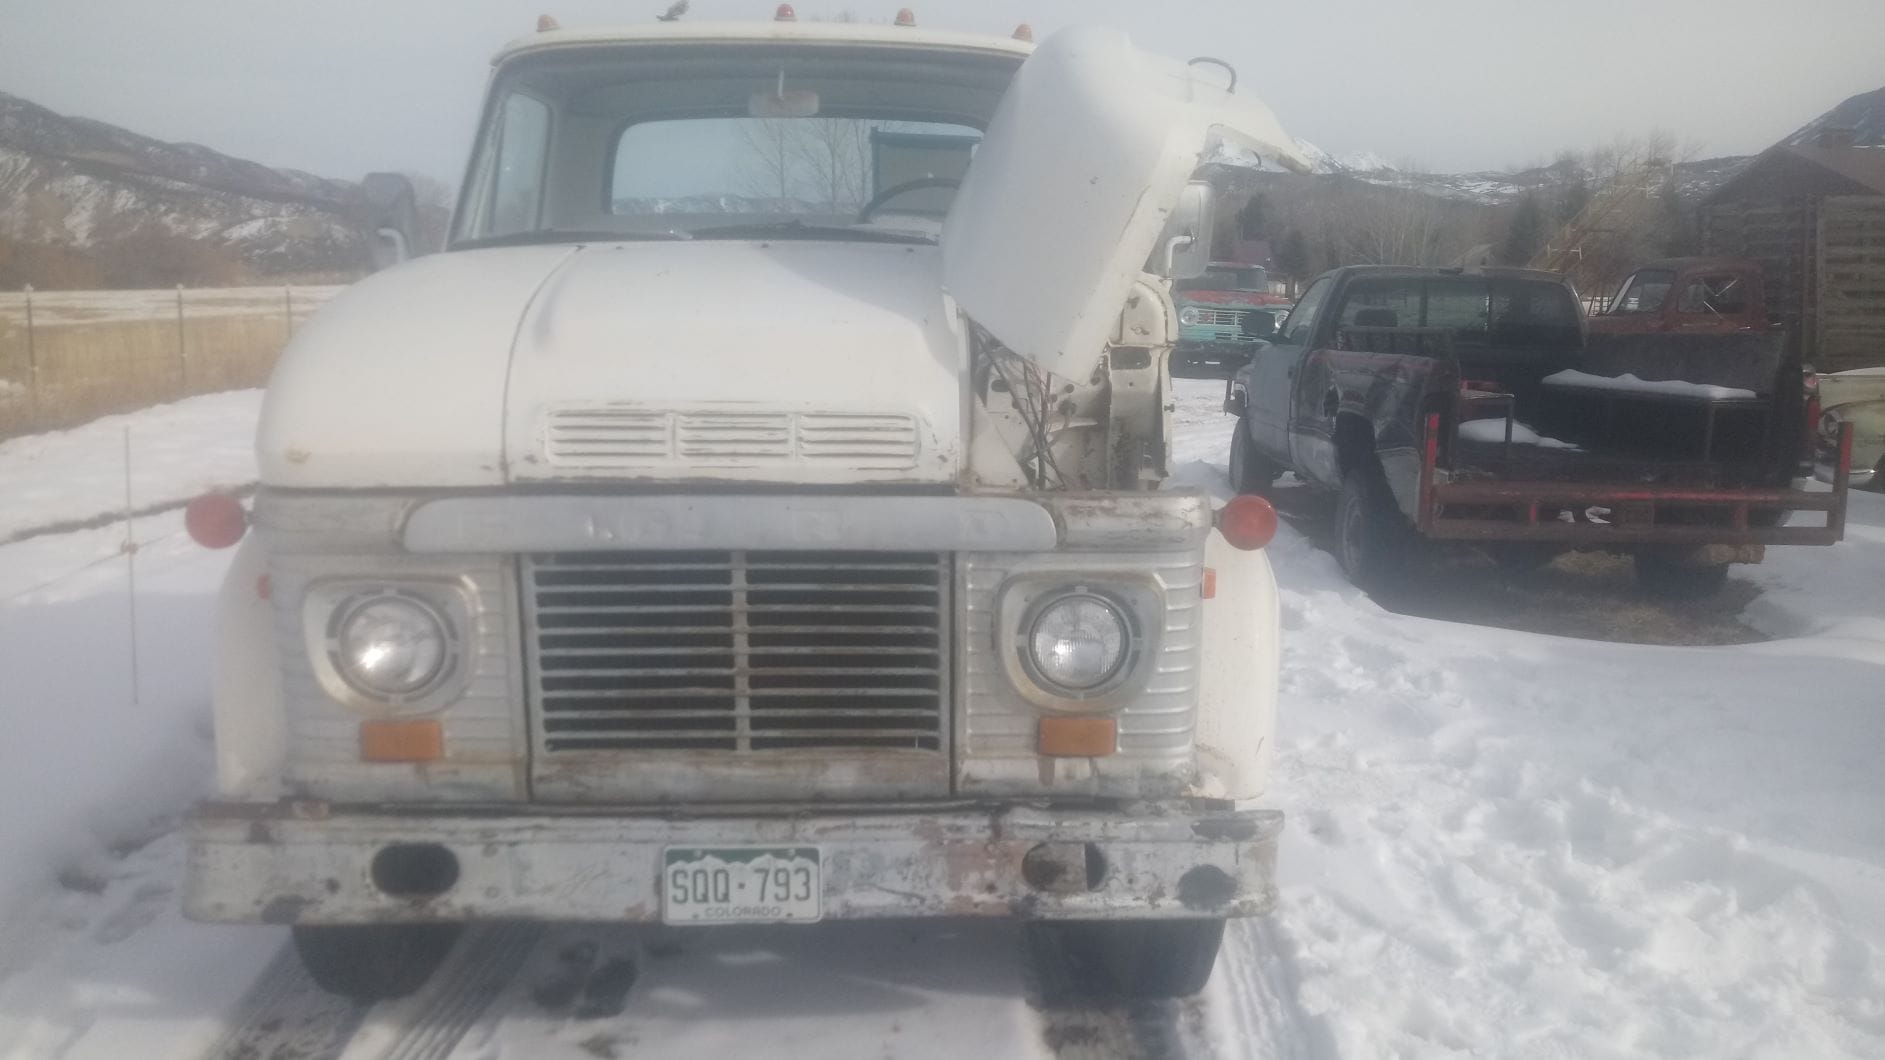 1965 Ford Ranch Wagon - Wife wants it GONE! - 1965 Ford N500 Trailer Toter For Sale - Make an Offer - Used - VIN N50AU699084 - 8 cyl - 4WD - Manual - Truck - White - Paonia, CO 81428, United States